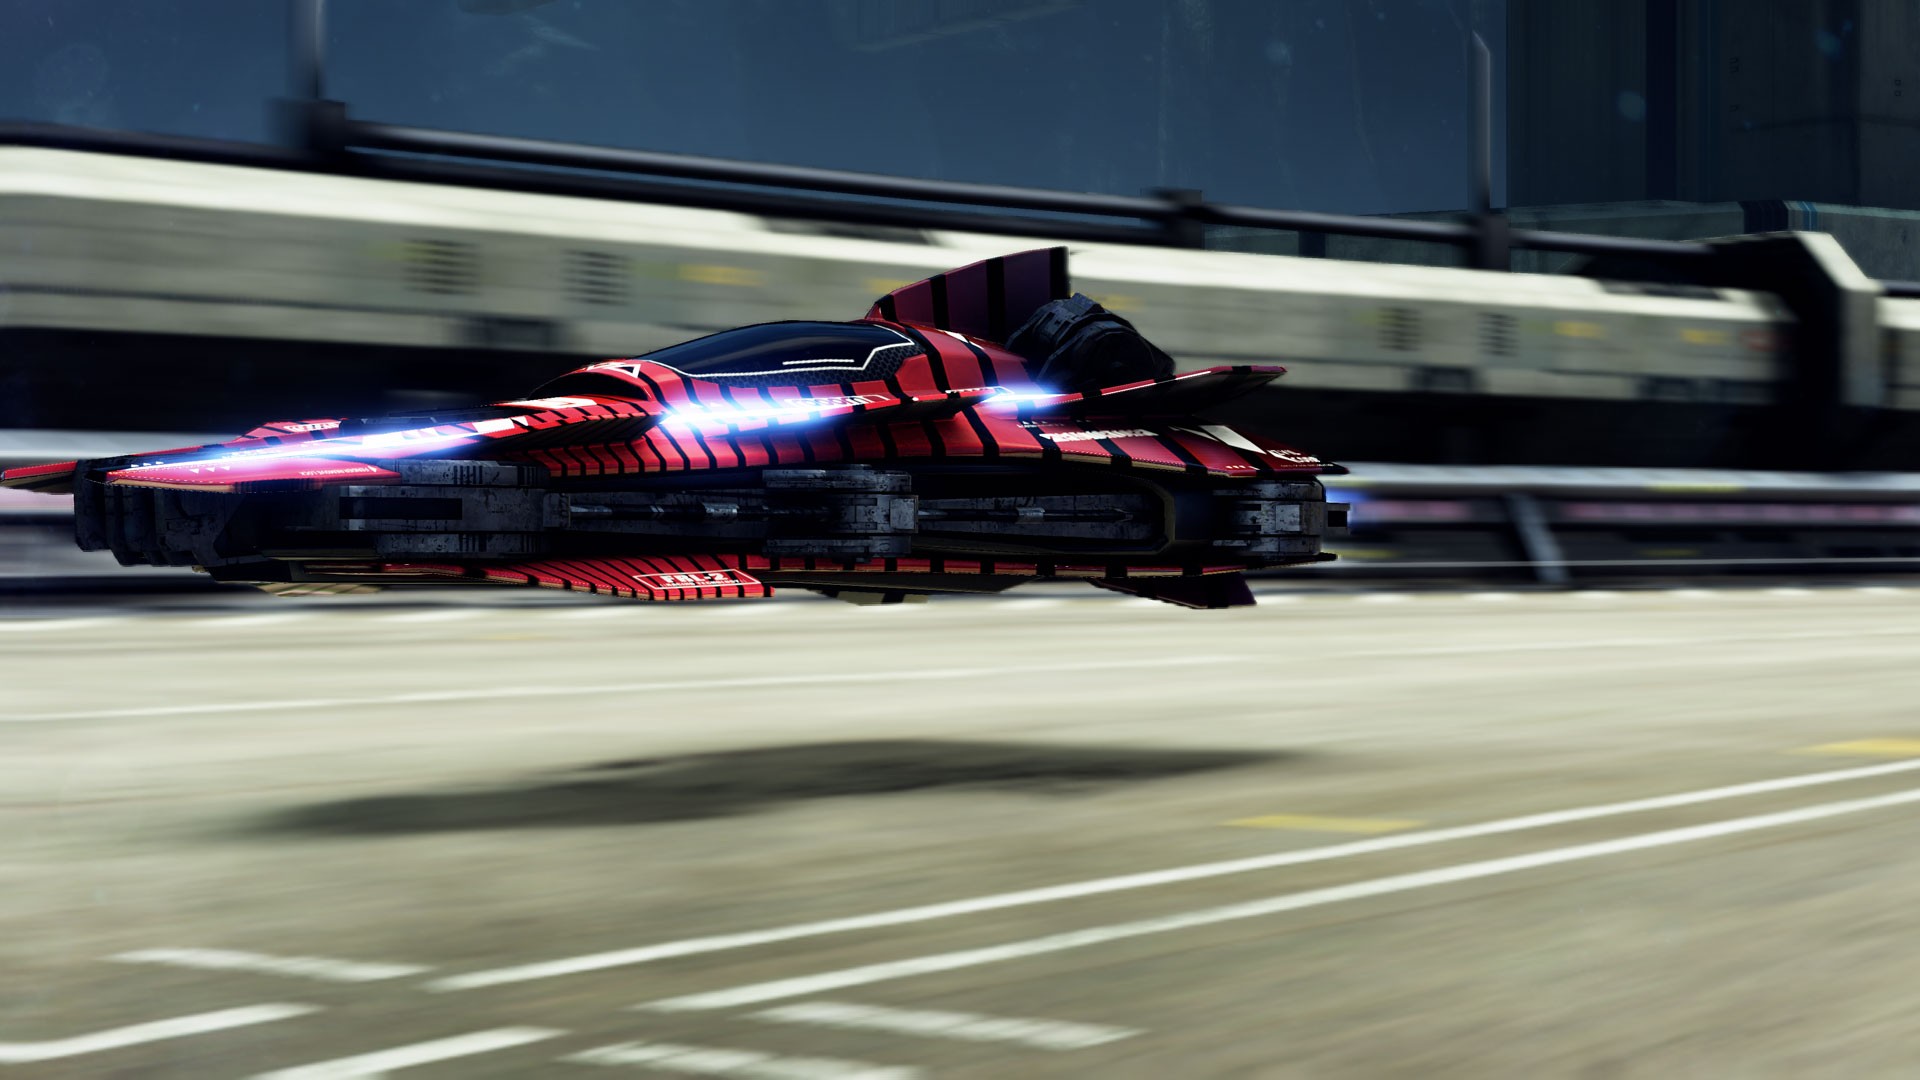 ZViL Fast Racing Neo Shinen Multimedia Ship Futuristic Video Games Road Ambient Floating Race Tracks 1920x1080